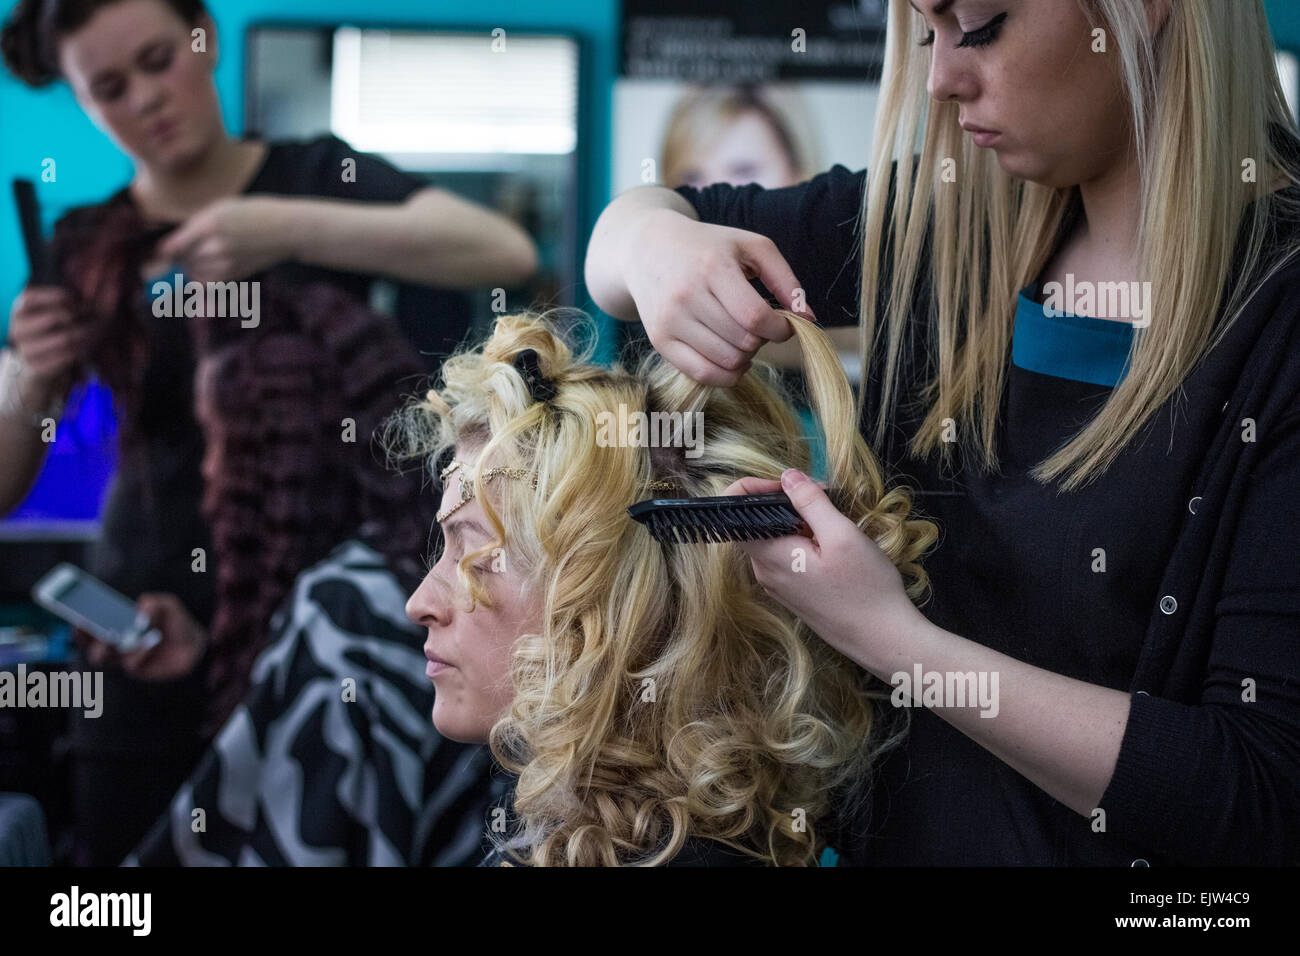 Hairdressers Working In A Salon In Uniform On Female Models With